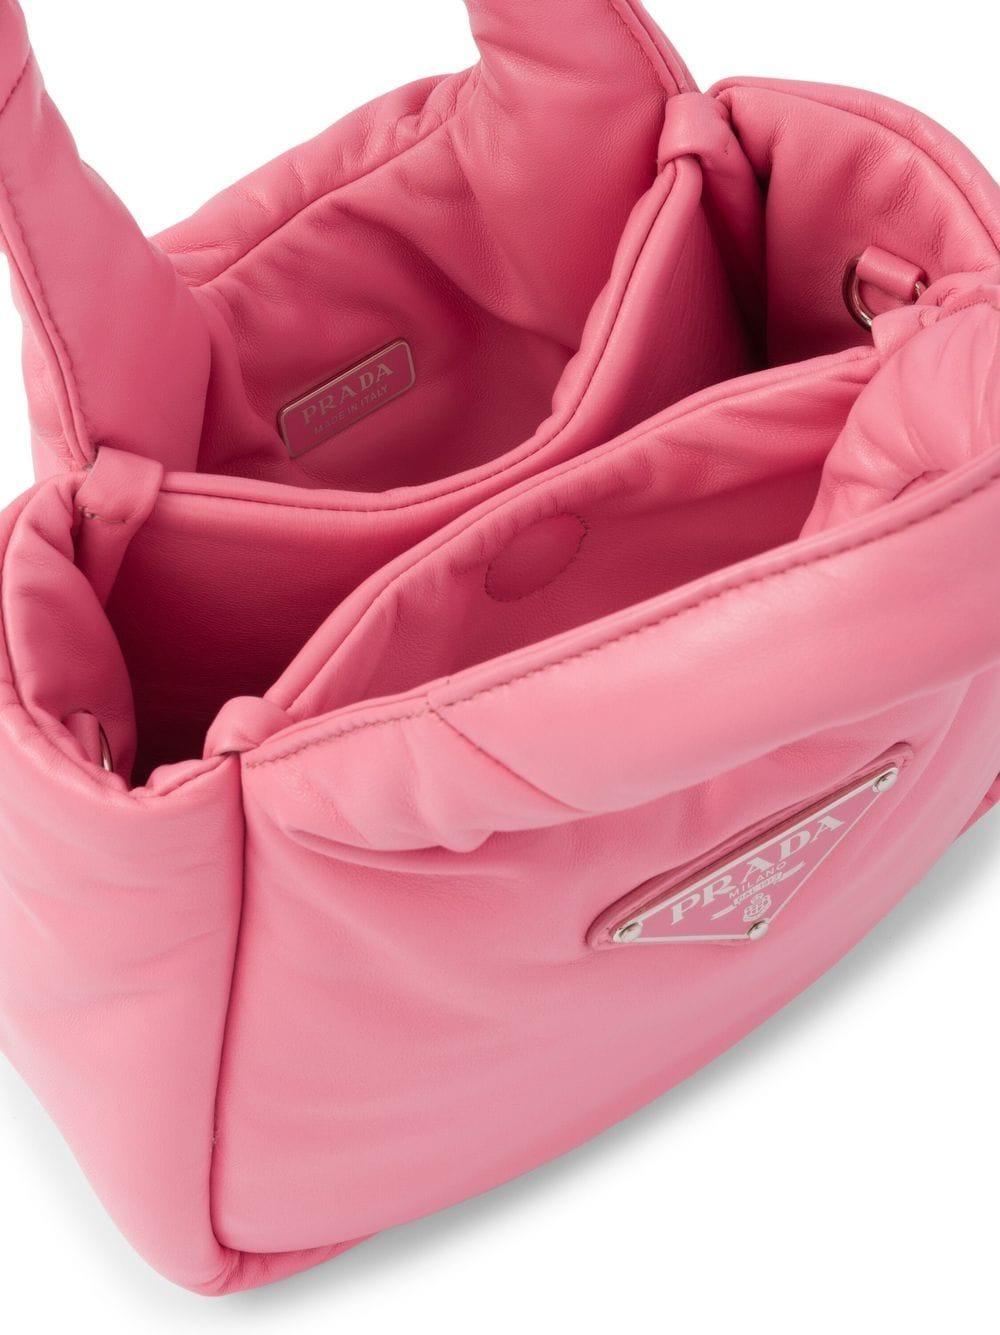 Prada Small Soft Padded Leather Bag in Pink | Lyst